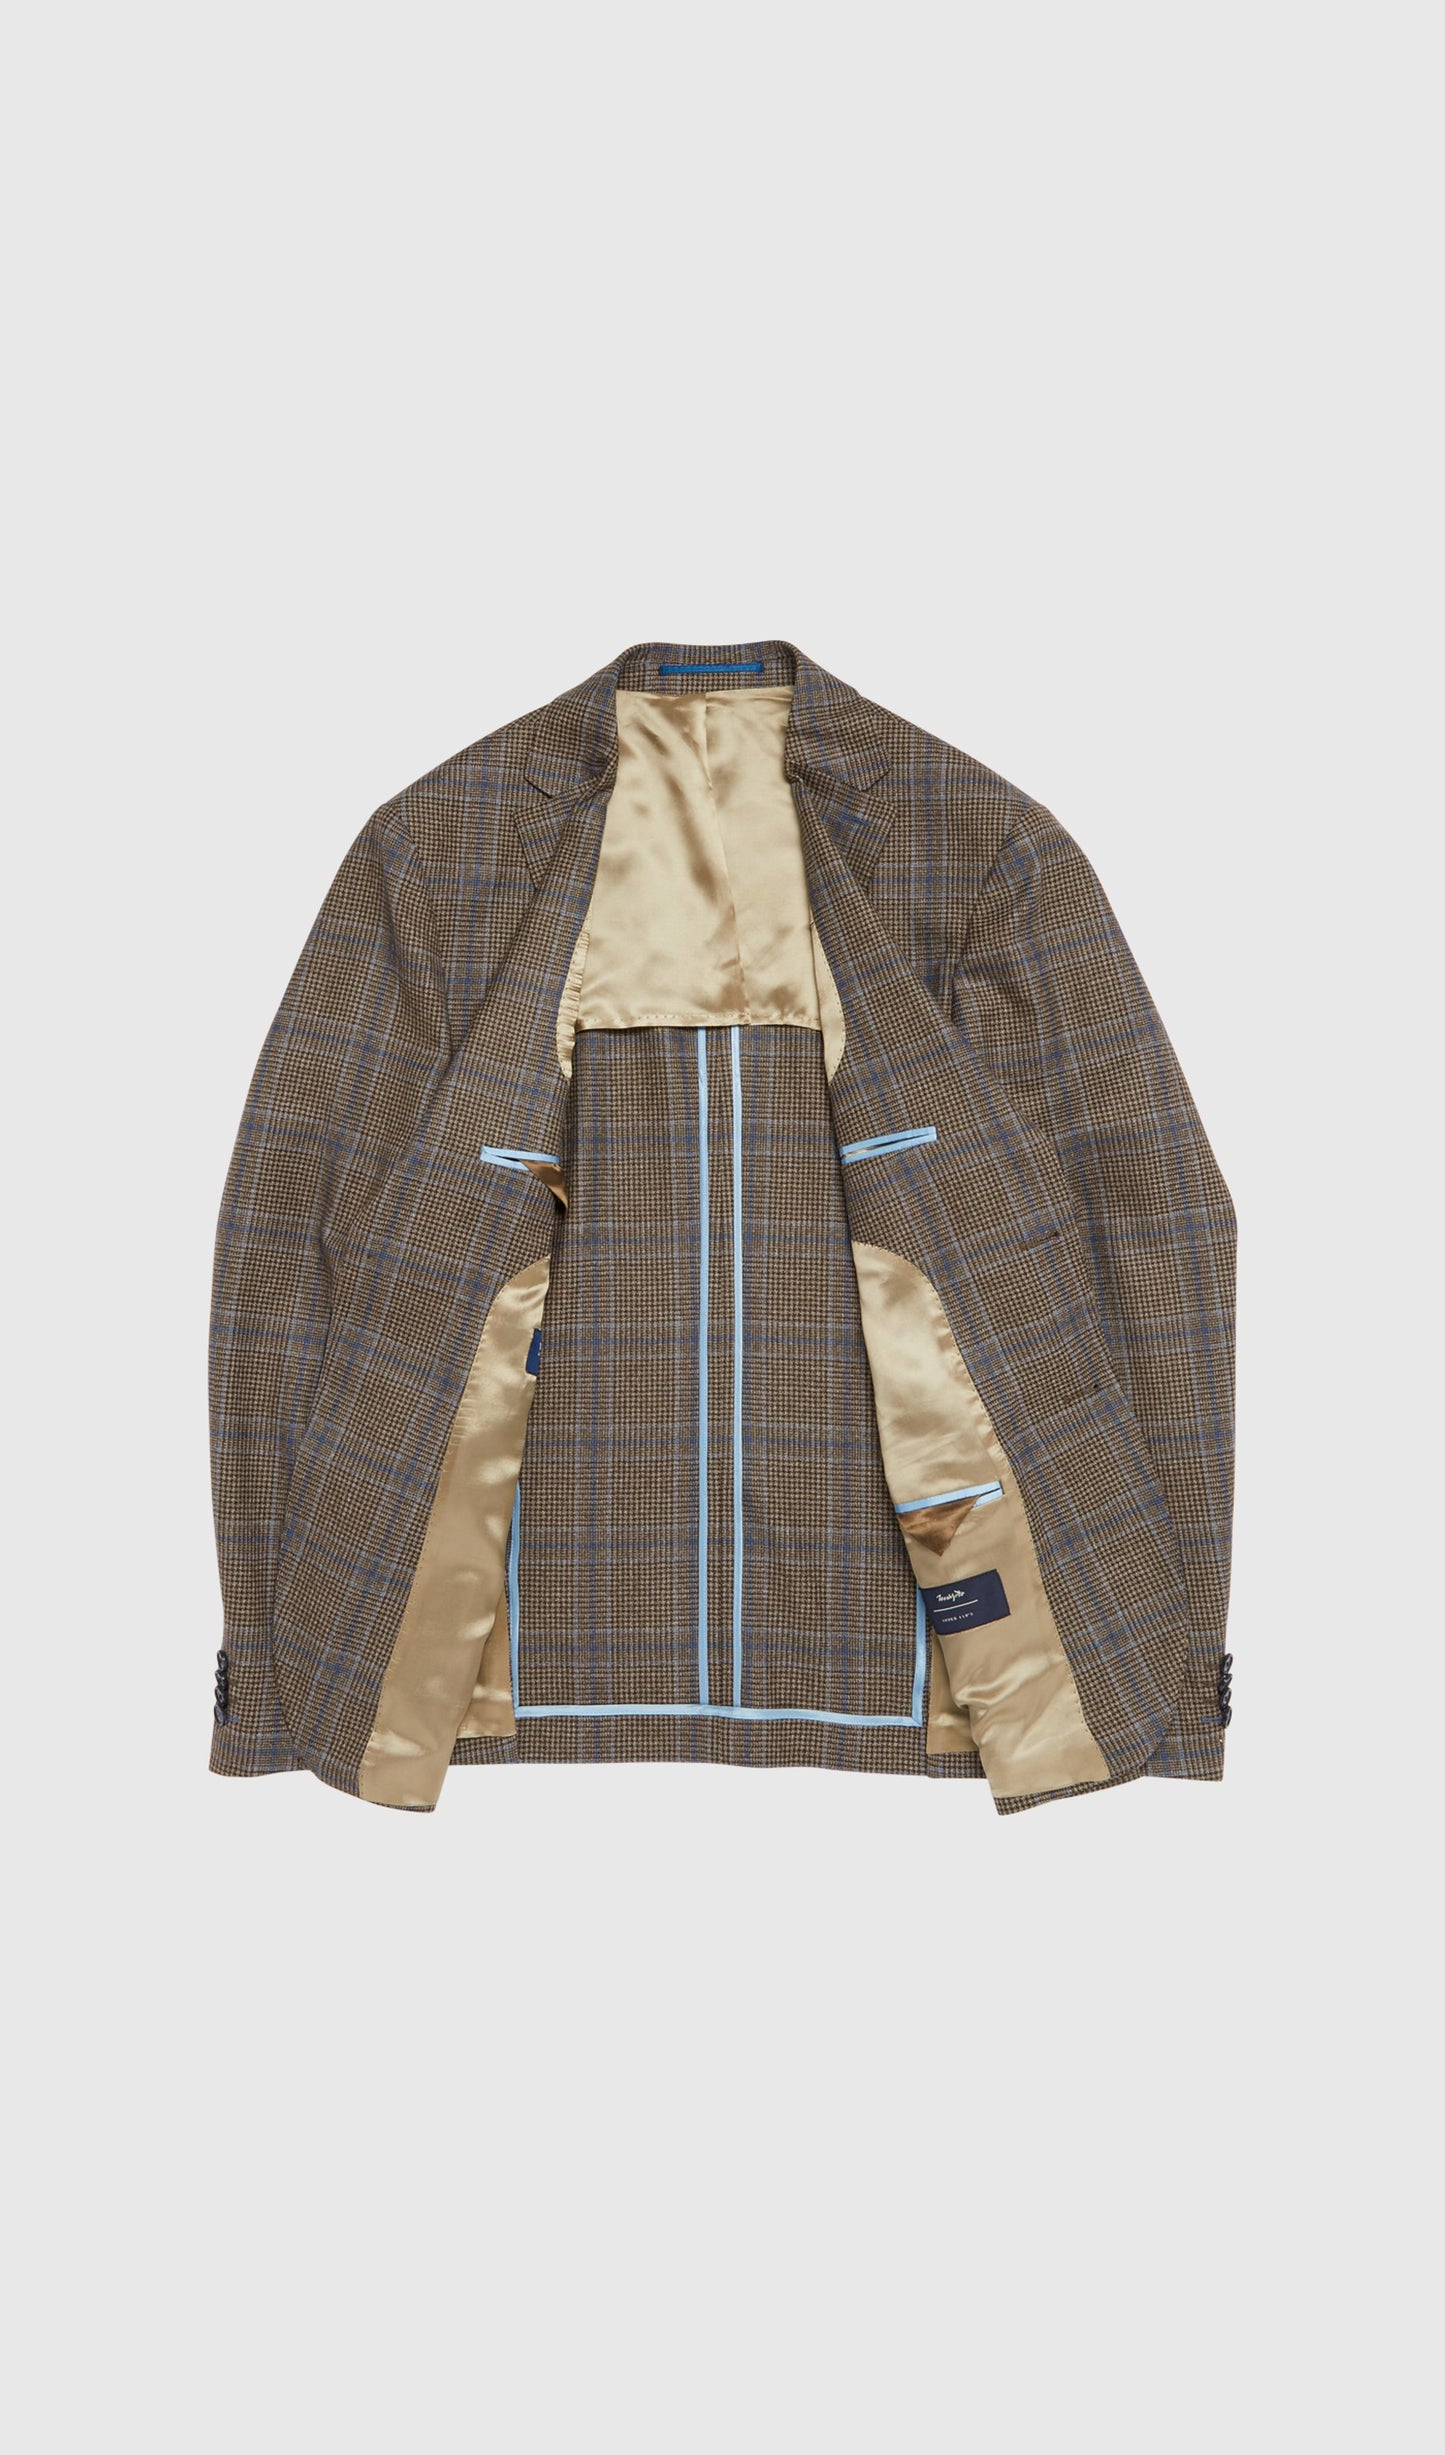 Image 7 of Maiden Slim Fit Blue And Brown Glencheck Jacket